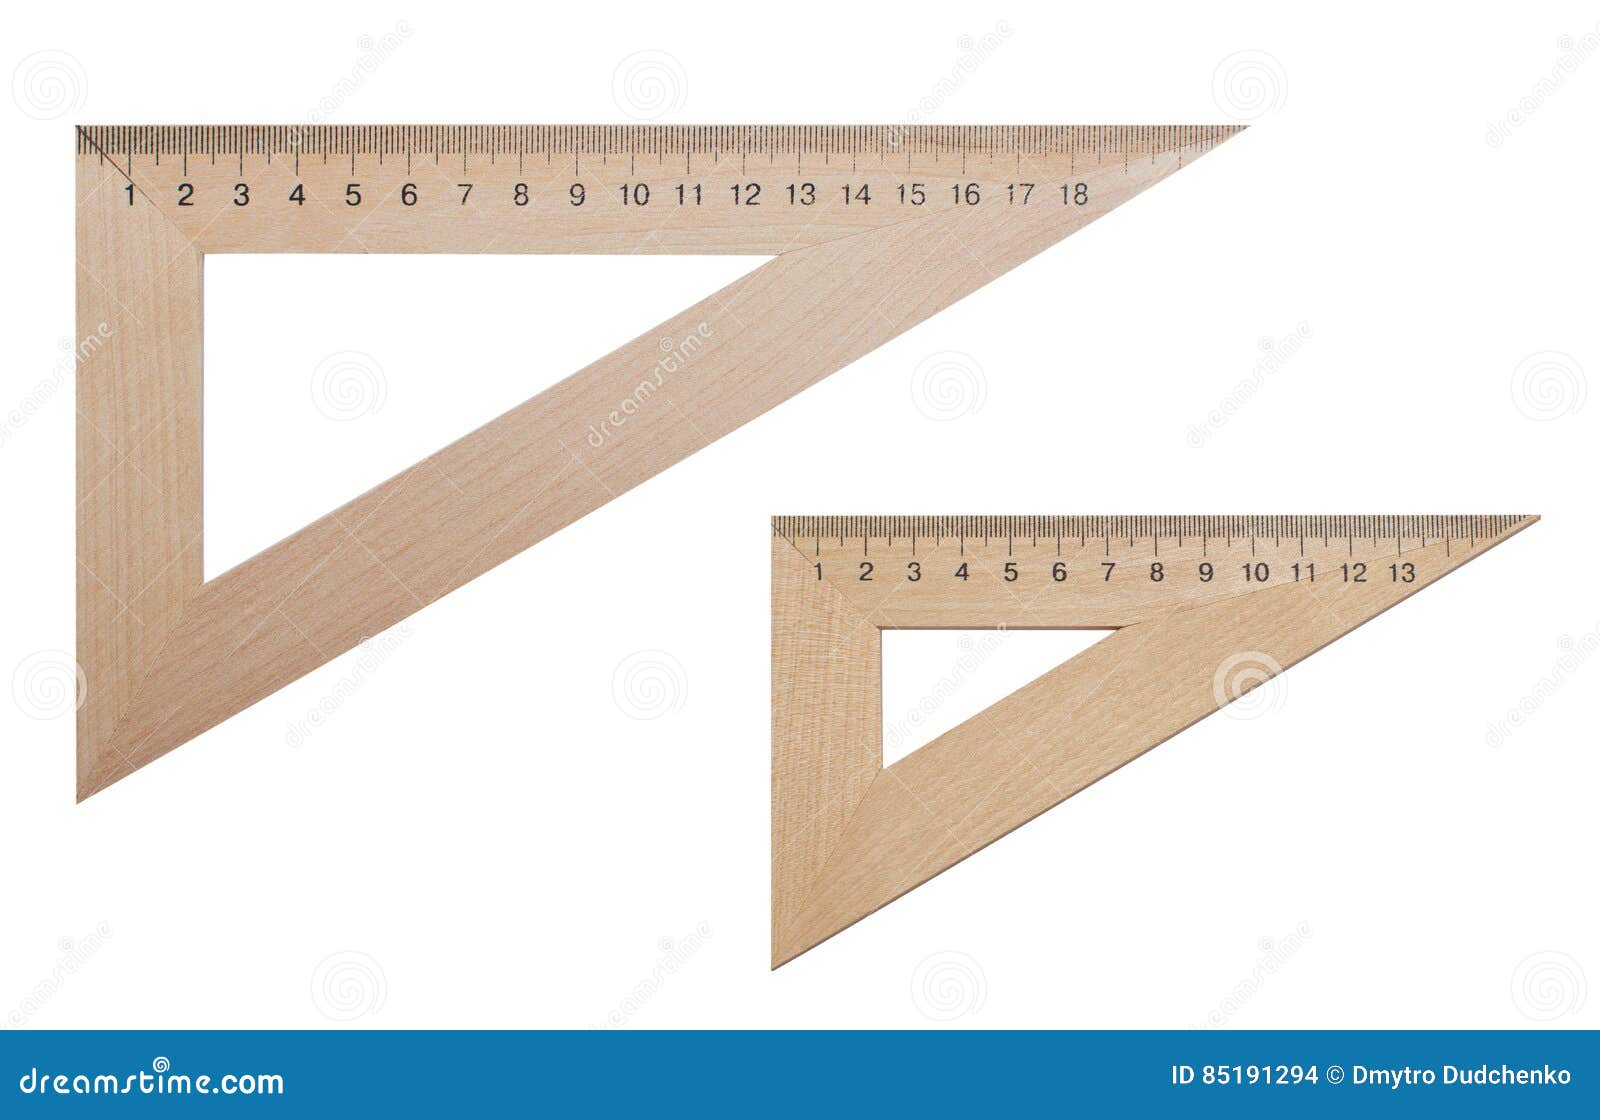 two triangular ruler made of wood 20 and 15 centimeters on a white,  background.